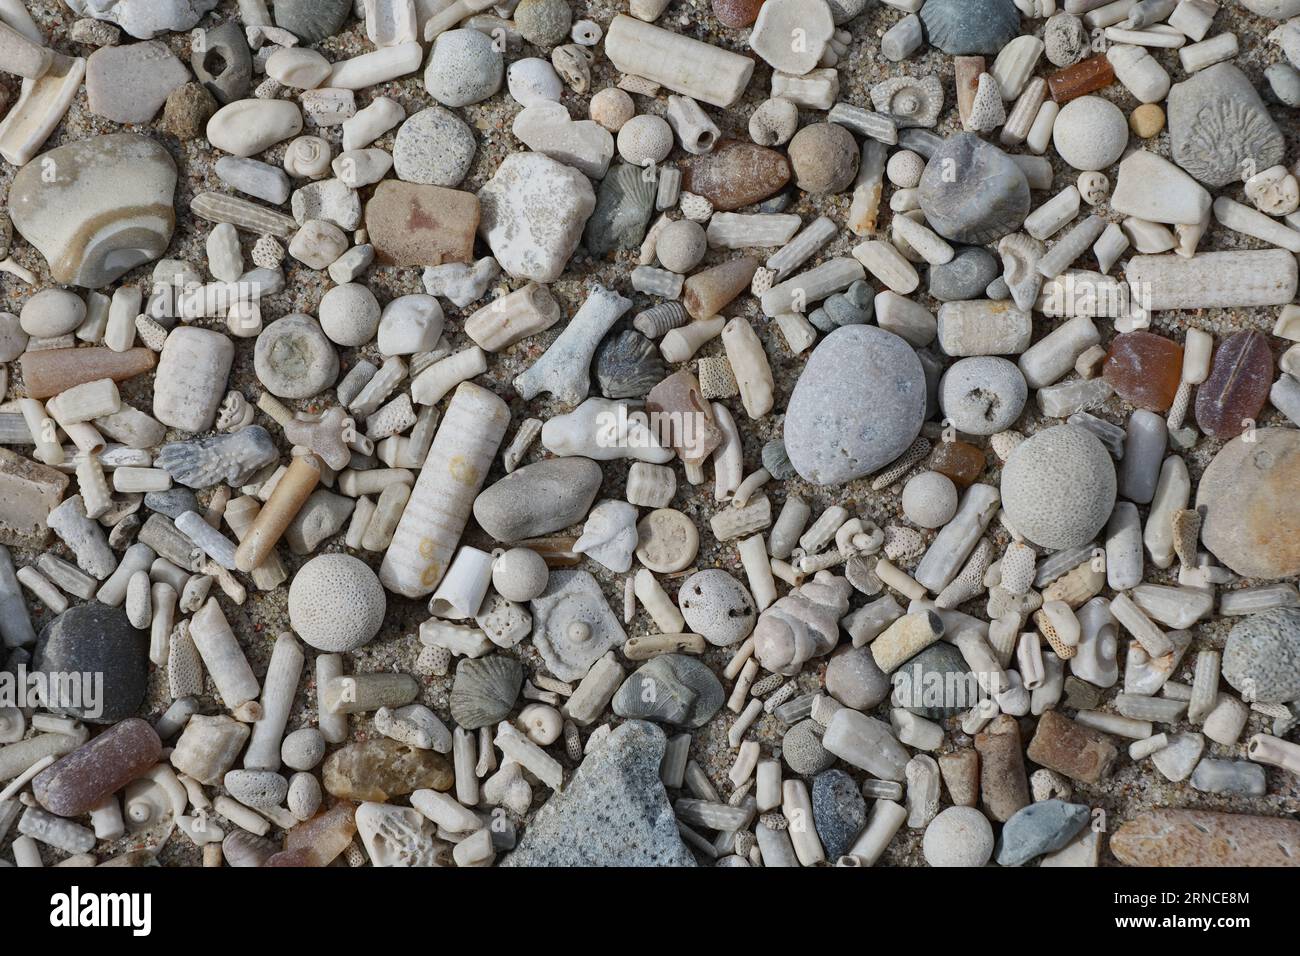 The fossils were found on the beach of Lubmin on the Greifswalder Bodden Stock Photo